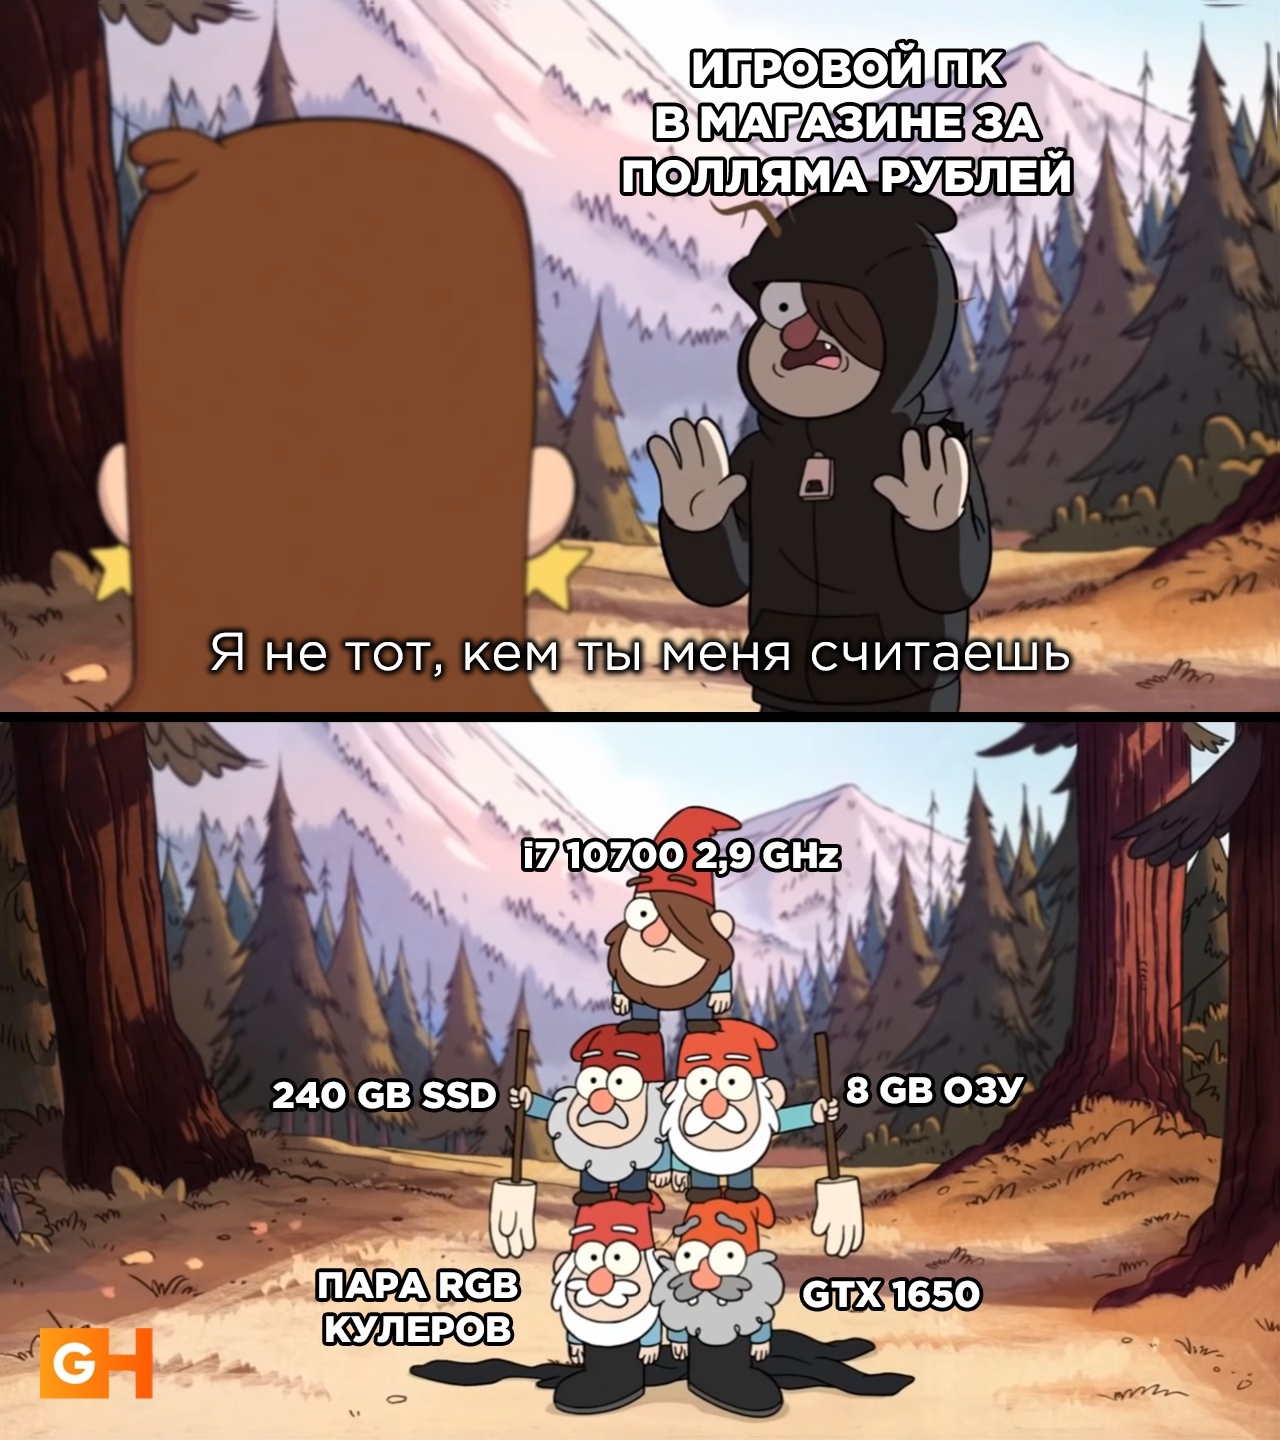 About current prices - Gravity falls, Memes, Gaming PC, Gamehub